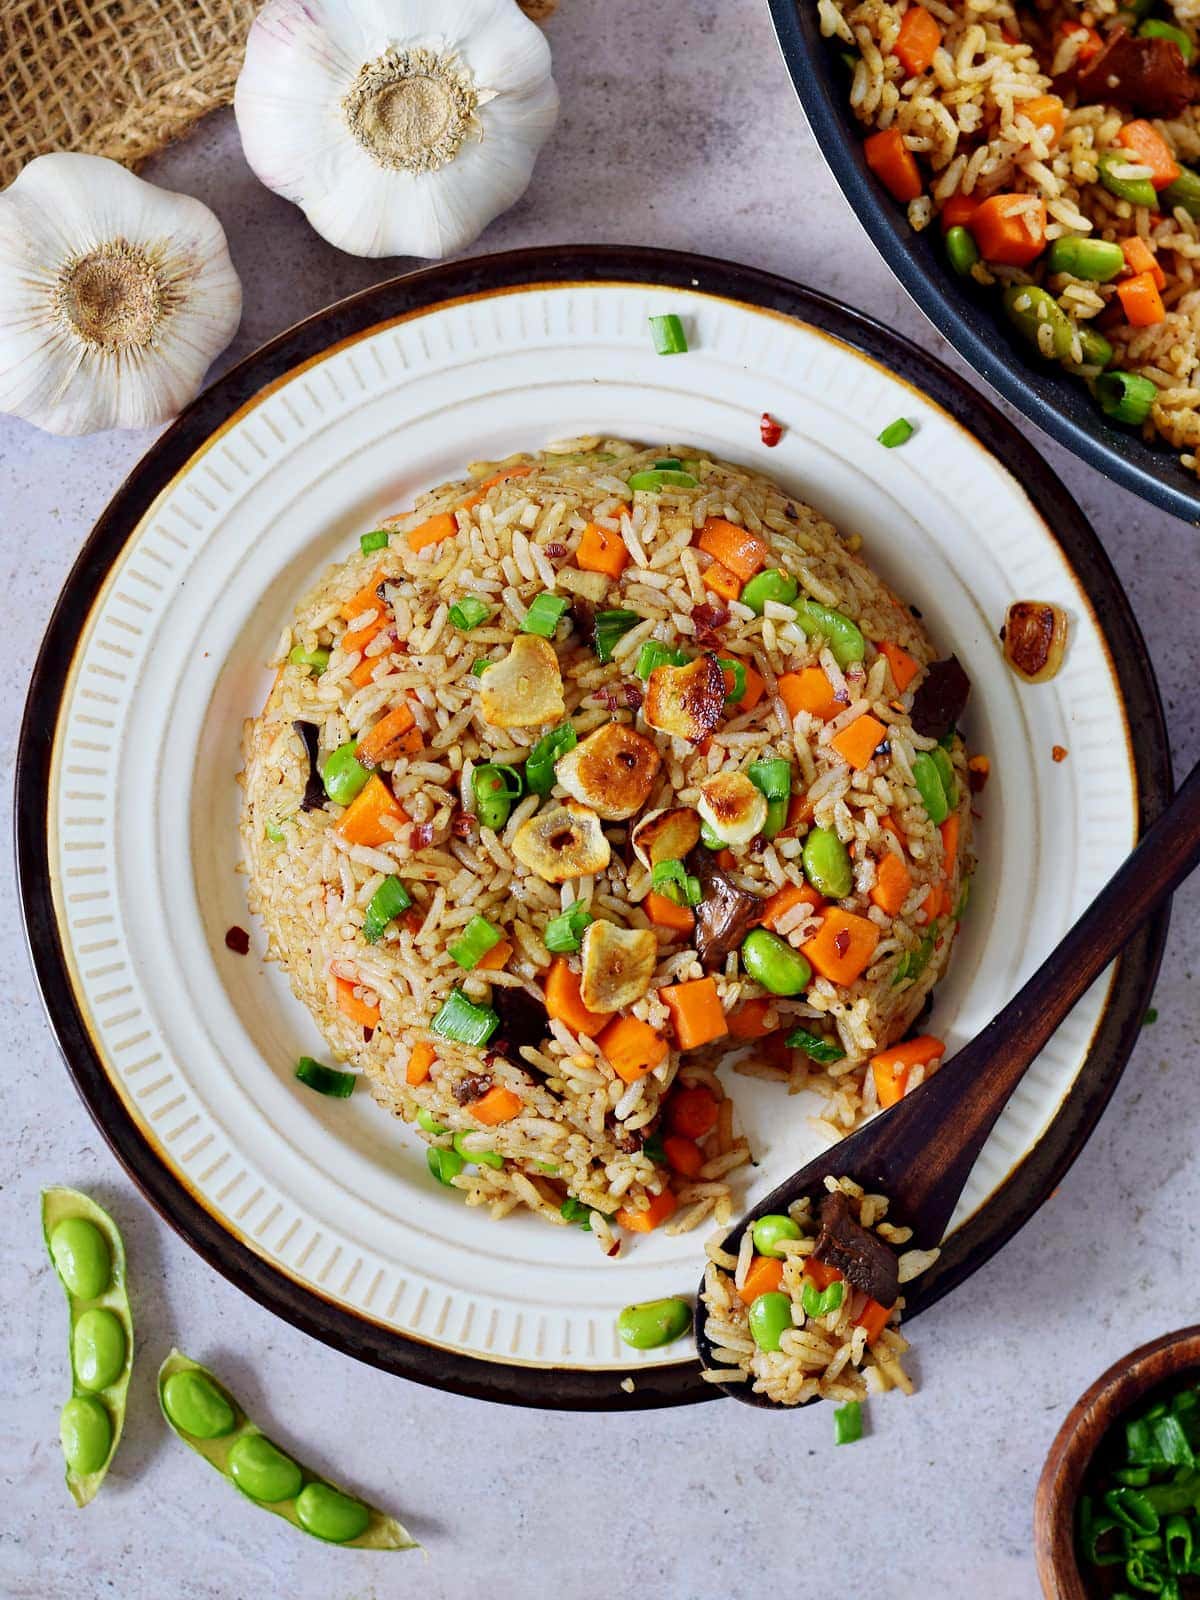 Japanese Hibachi fried rice on plate with spoon